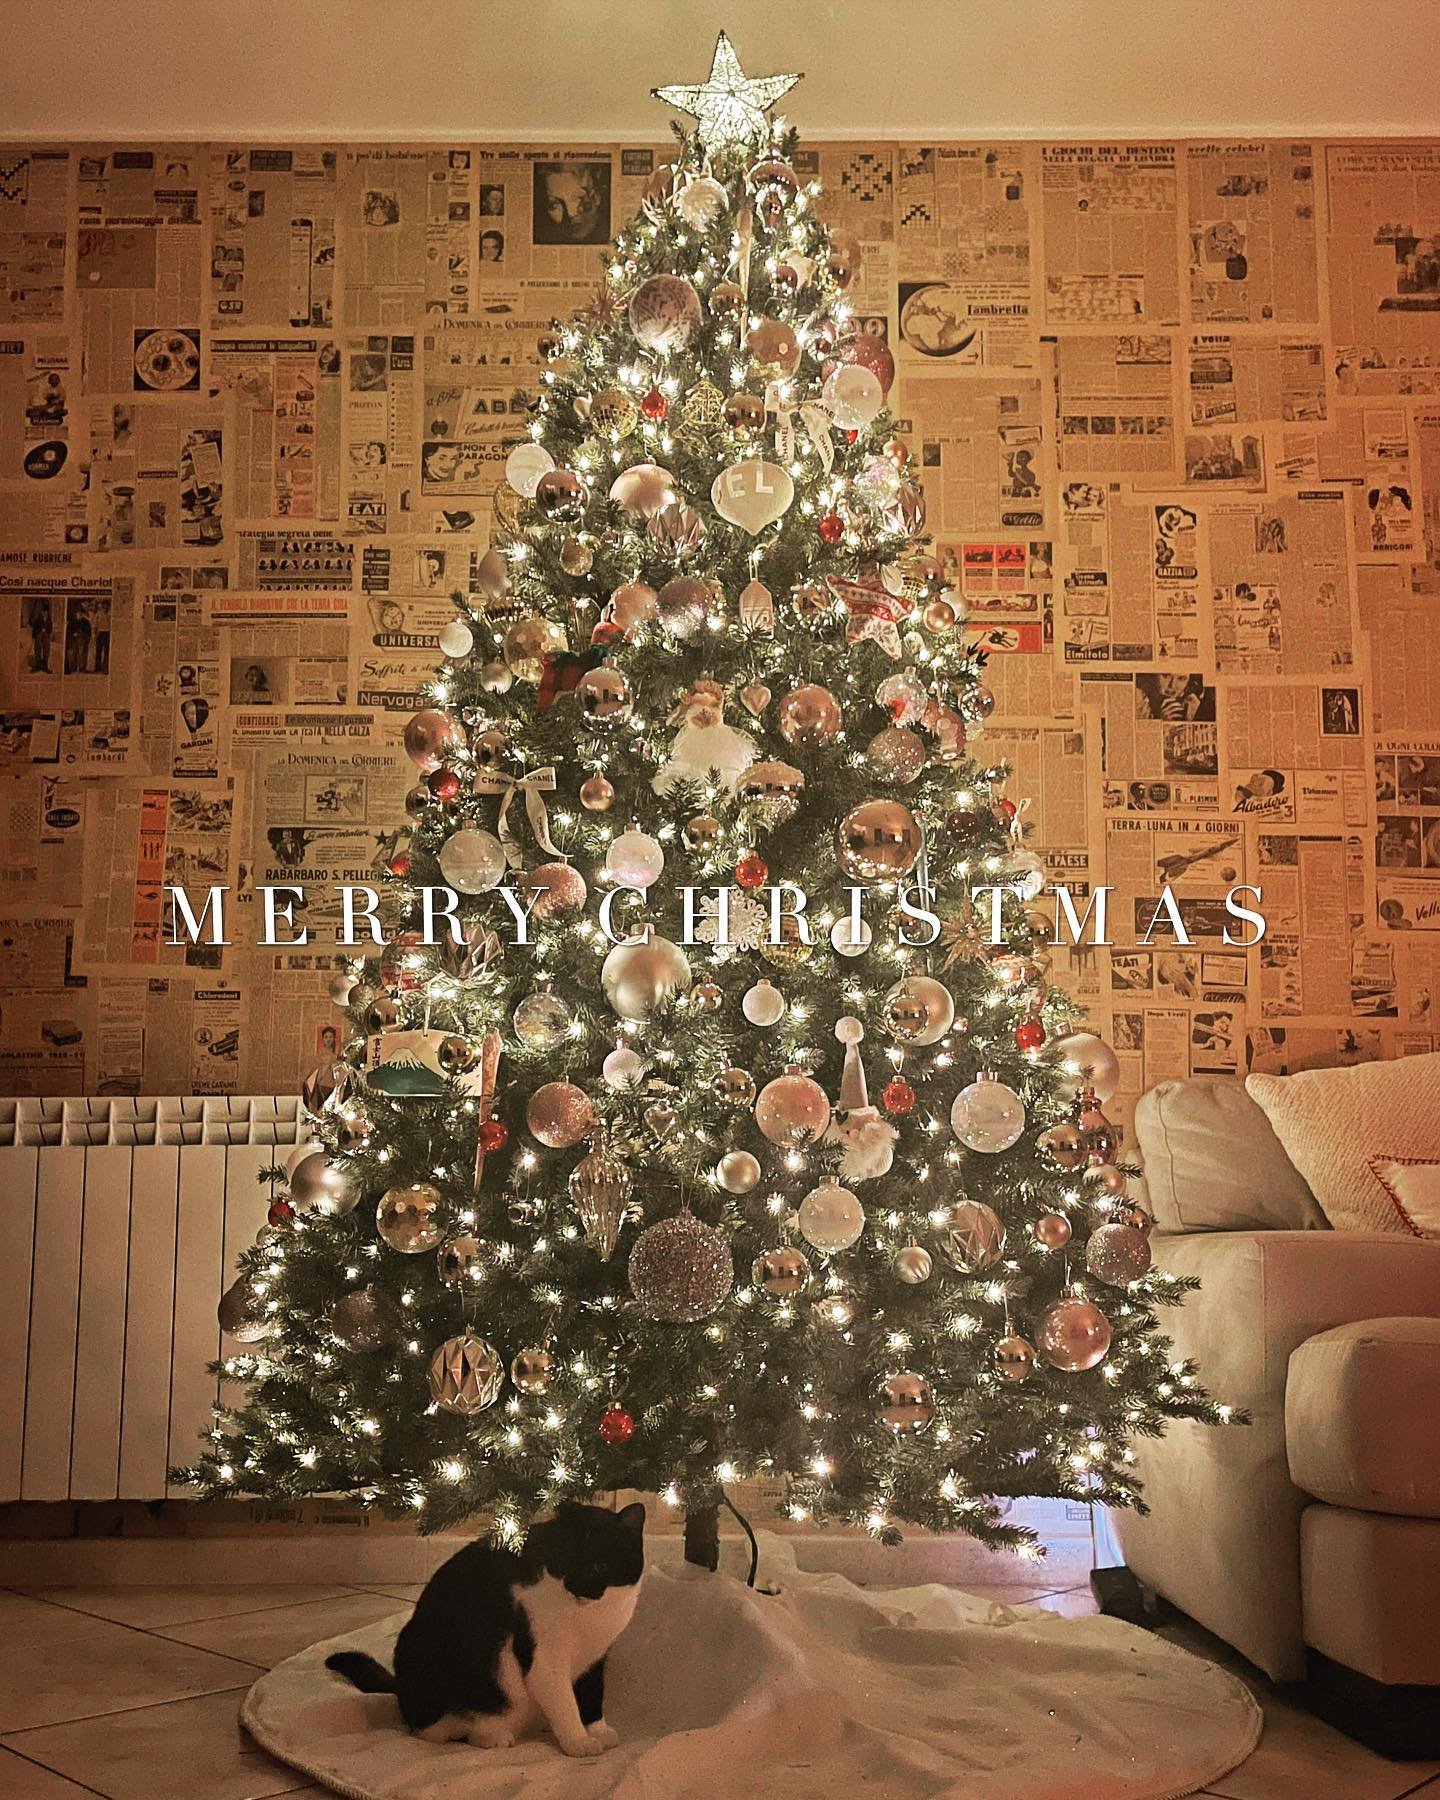 Wishing you a Merry Christmas &amp; happy, healthy holiday to you and your love ones😘
.
A little update, it&rsquo;s official the new addition to our family is right there under the tree 😆
.
.
.
#merrychristmas #merrychristmas2022 #thisisus #familyo